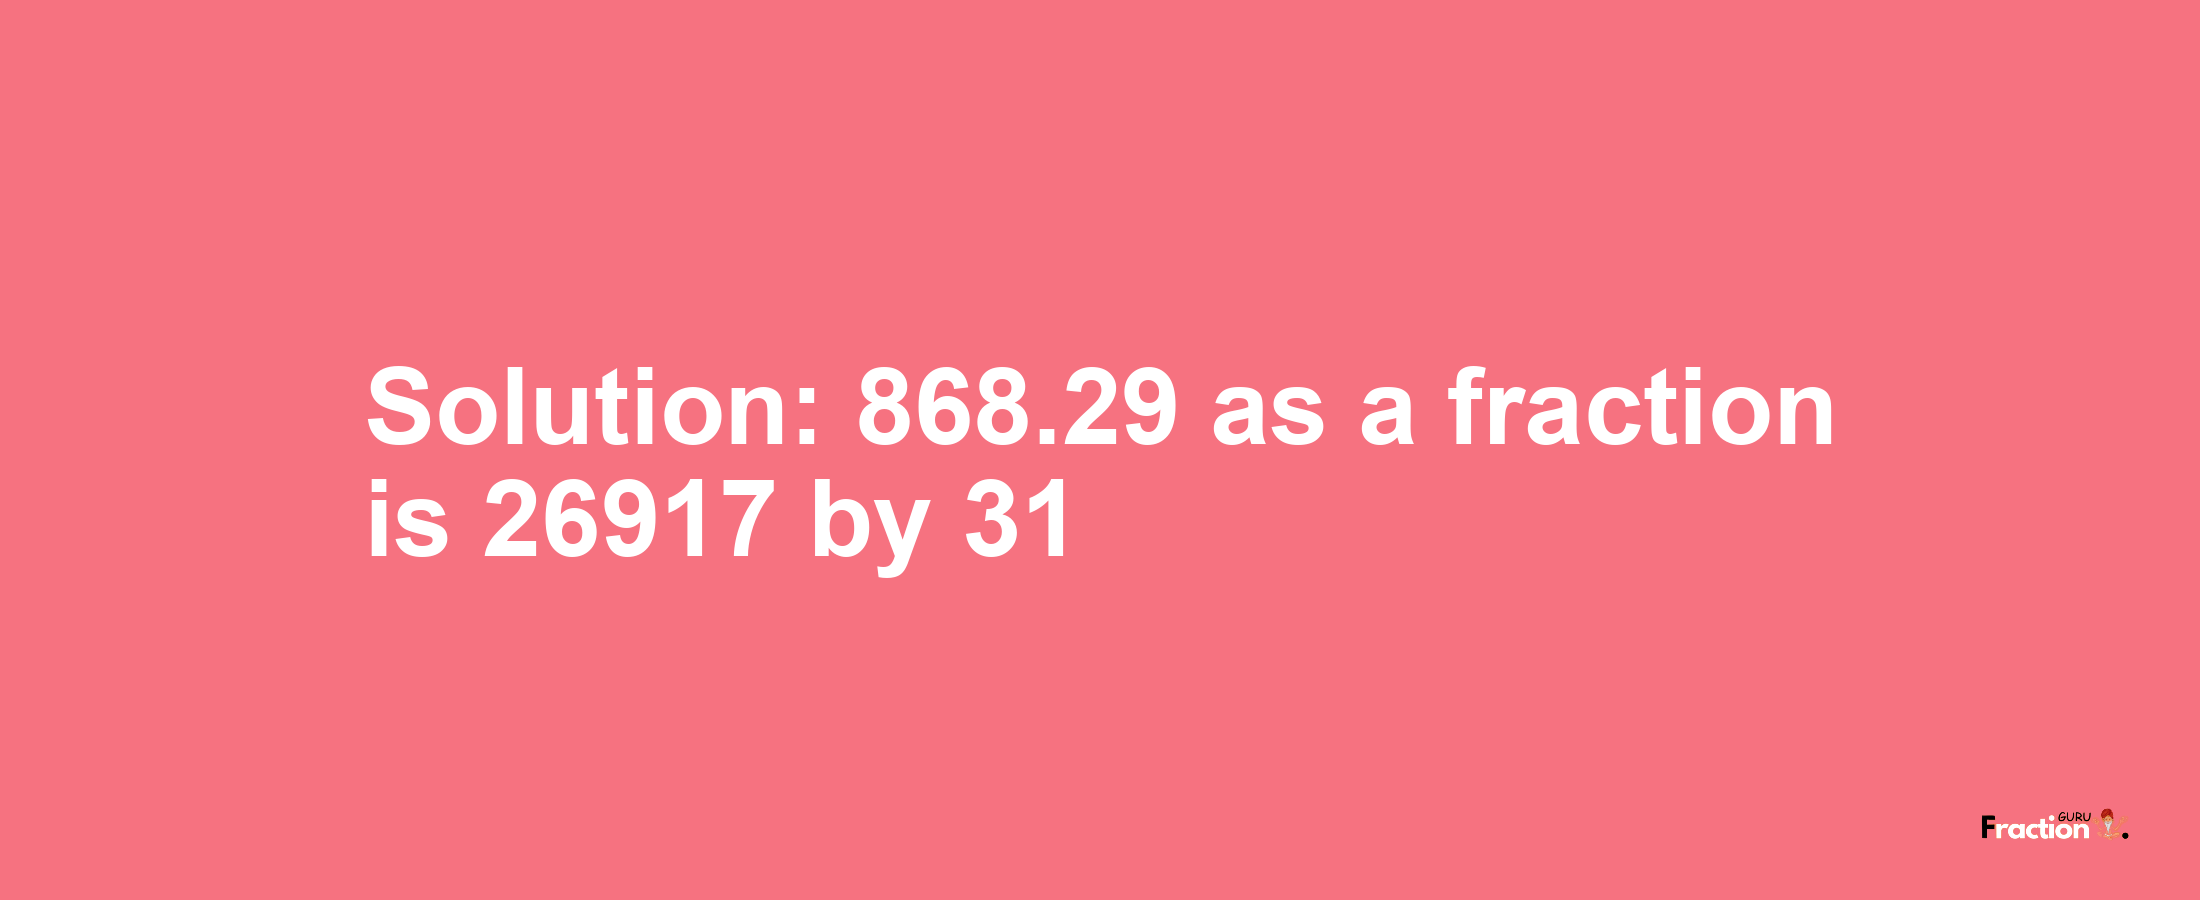 Solution:868.29 as a fraction is 26917/31